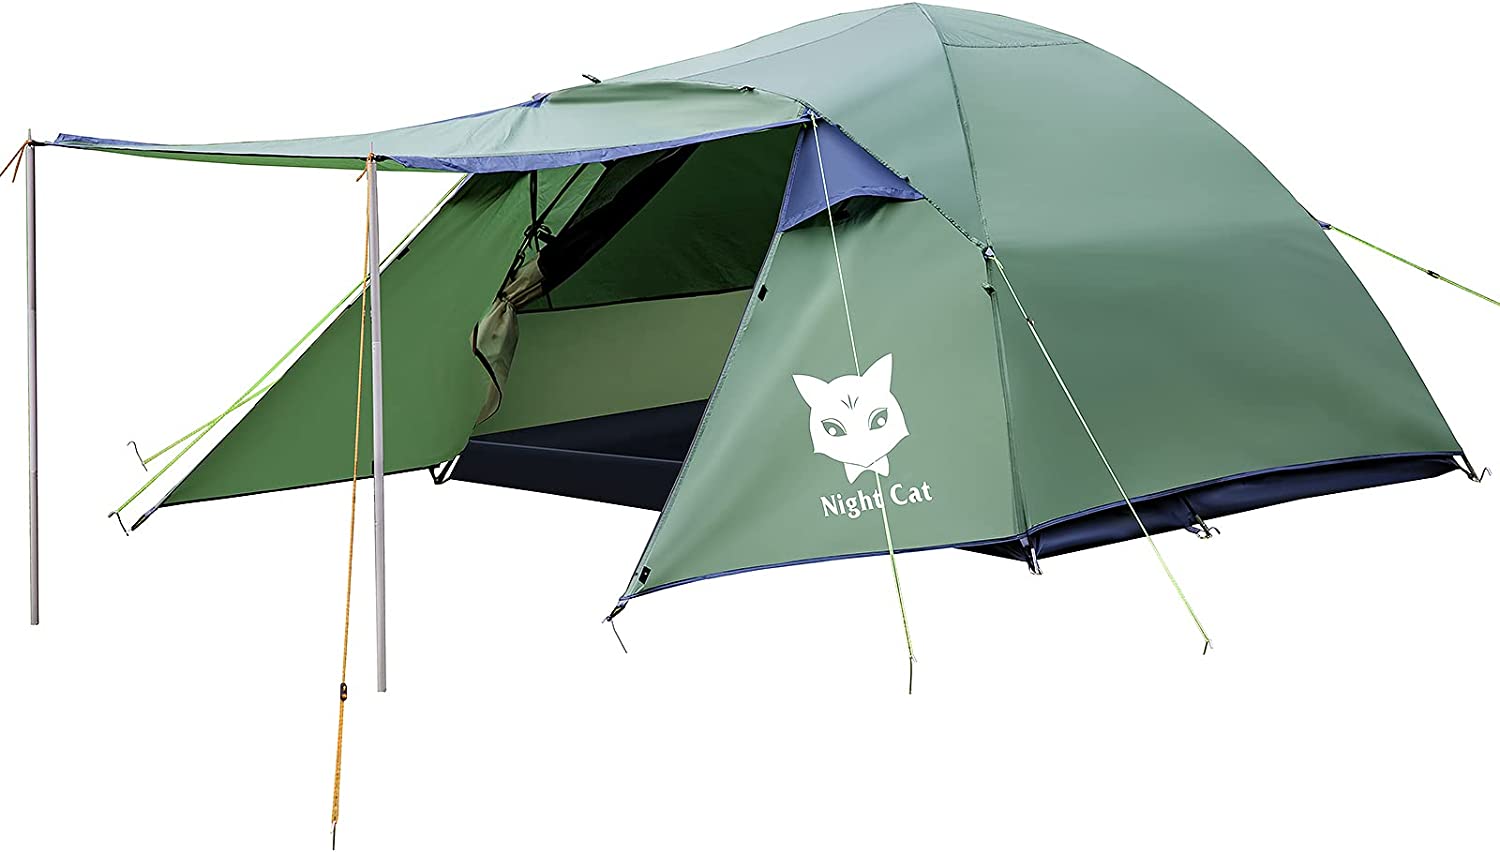 Night Cat BackPacking Tent 2 Man Person Waterproof Lightweight Easy Set Up for 